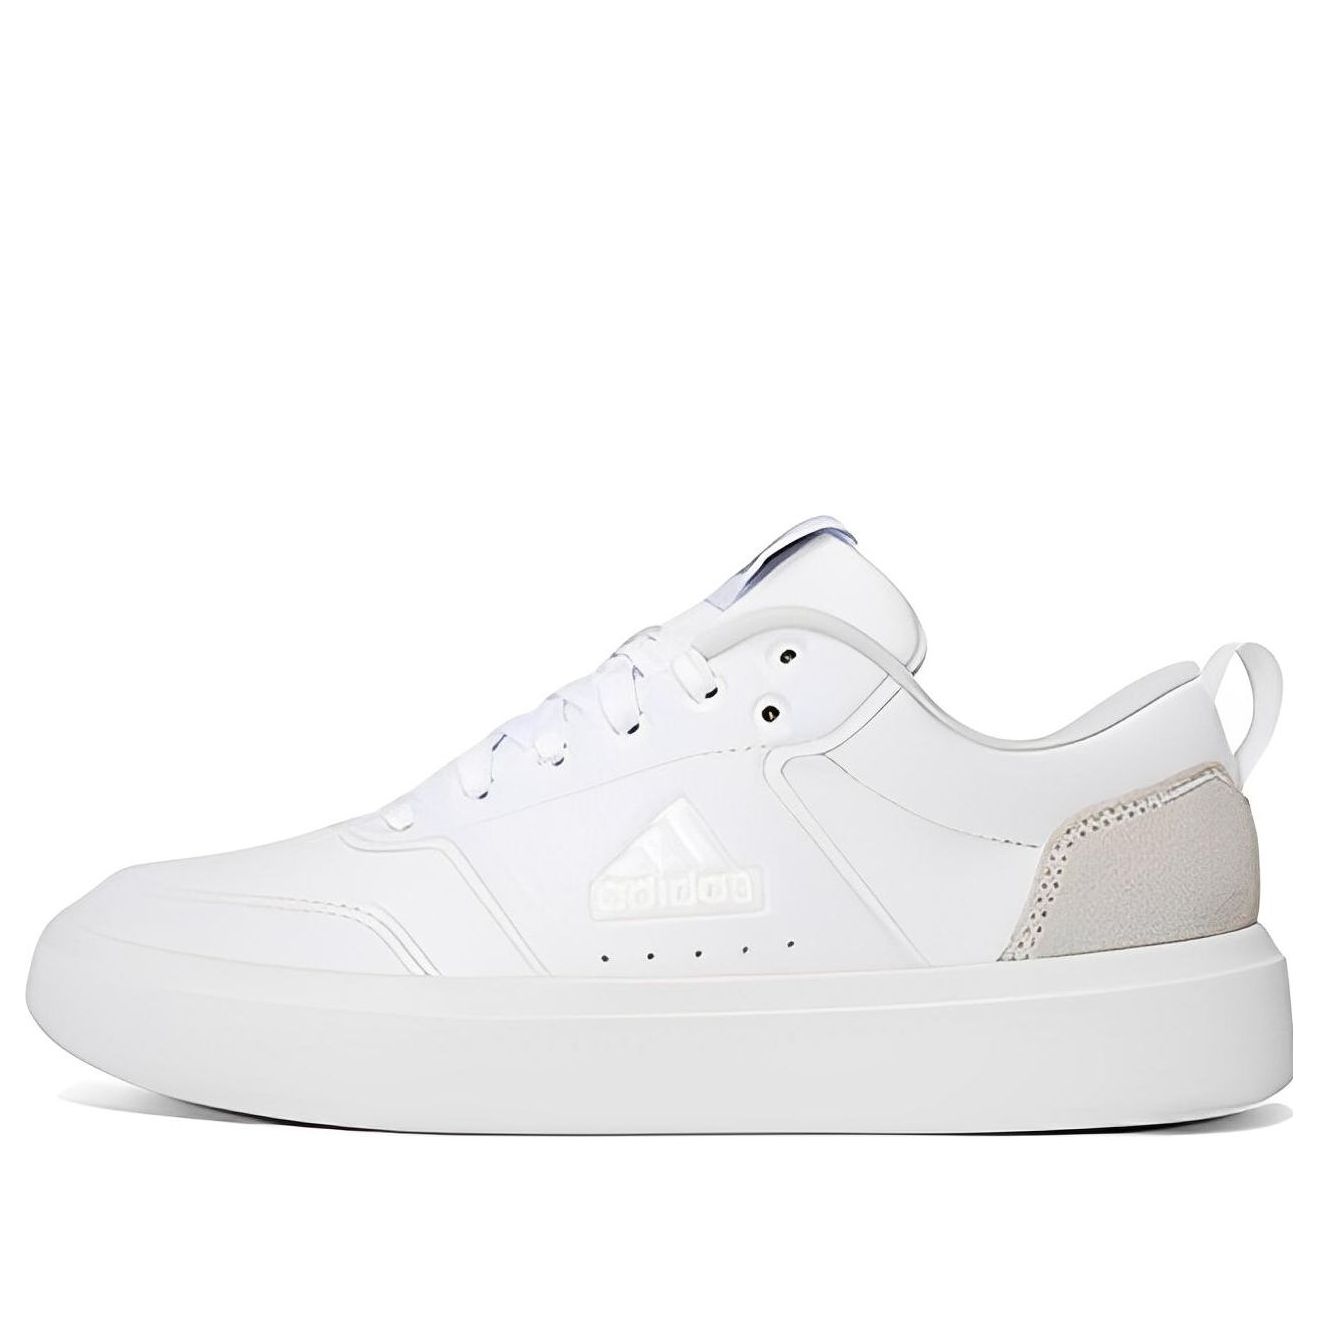 adidas Park Street Shoes 'Cloud White Grey Two' IG9848